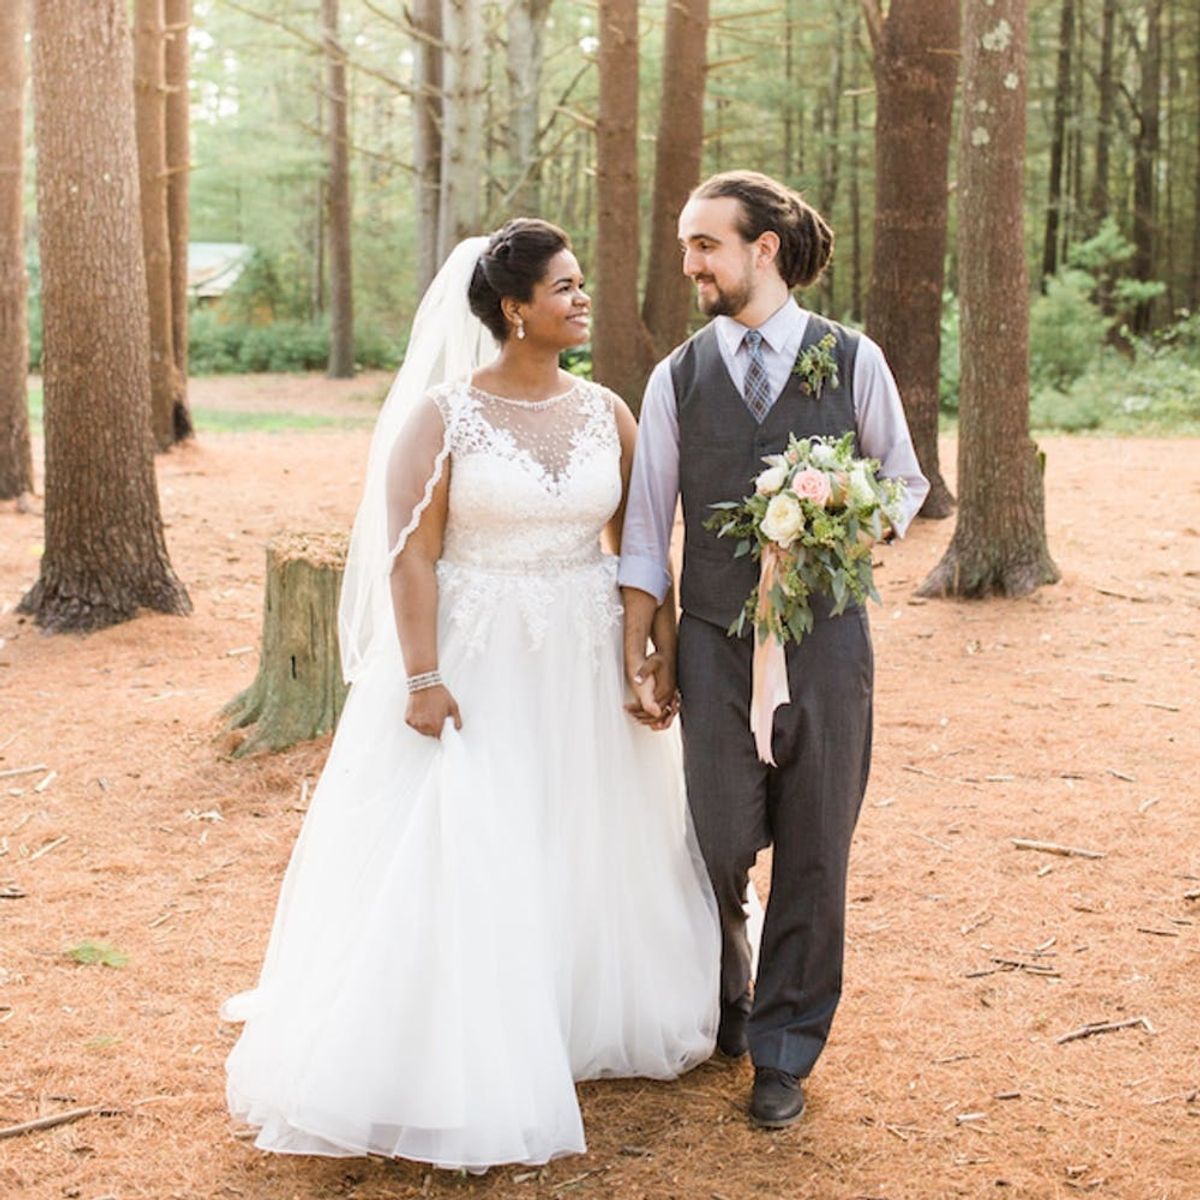 This Couple’s Rhode Island Wedding Was Pretty, Punny and DIYed to Perfection